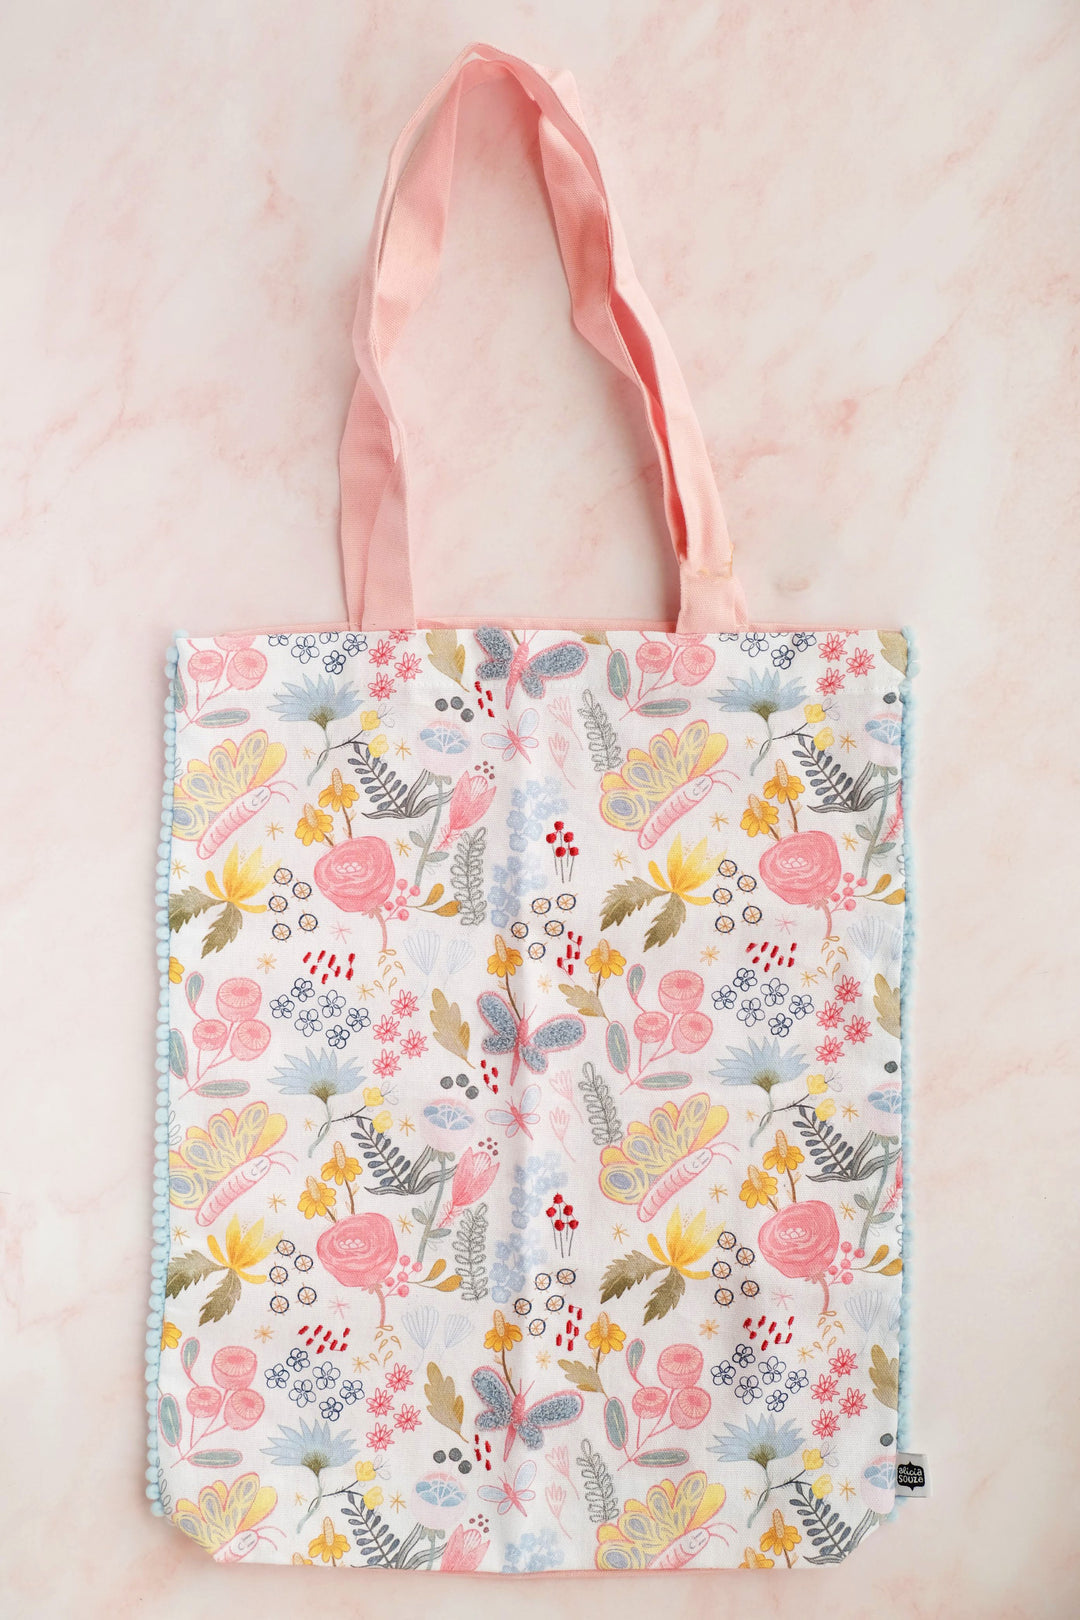 Butterfly Garden Embroidered Tote Bag